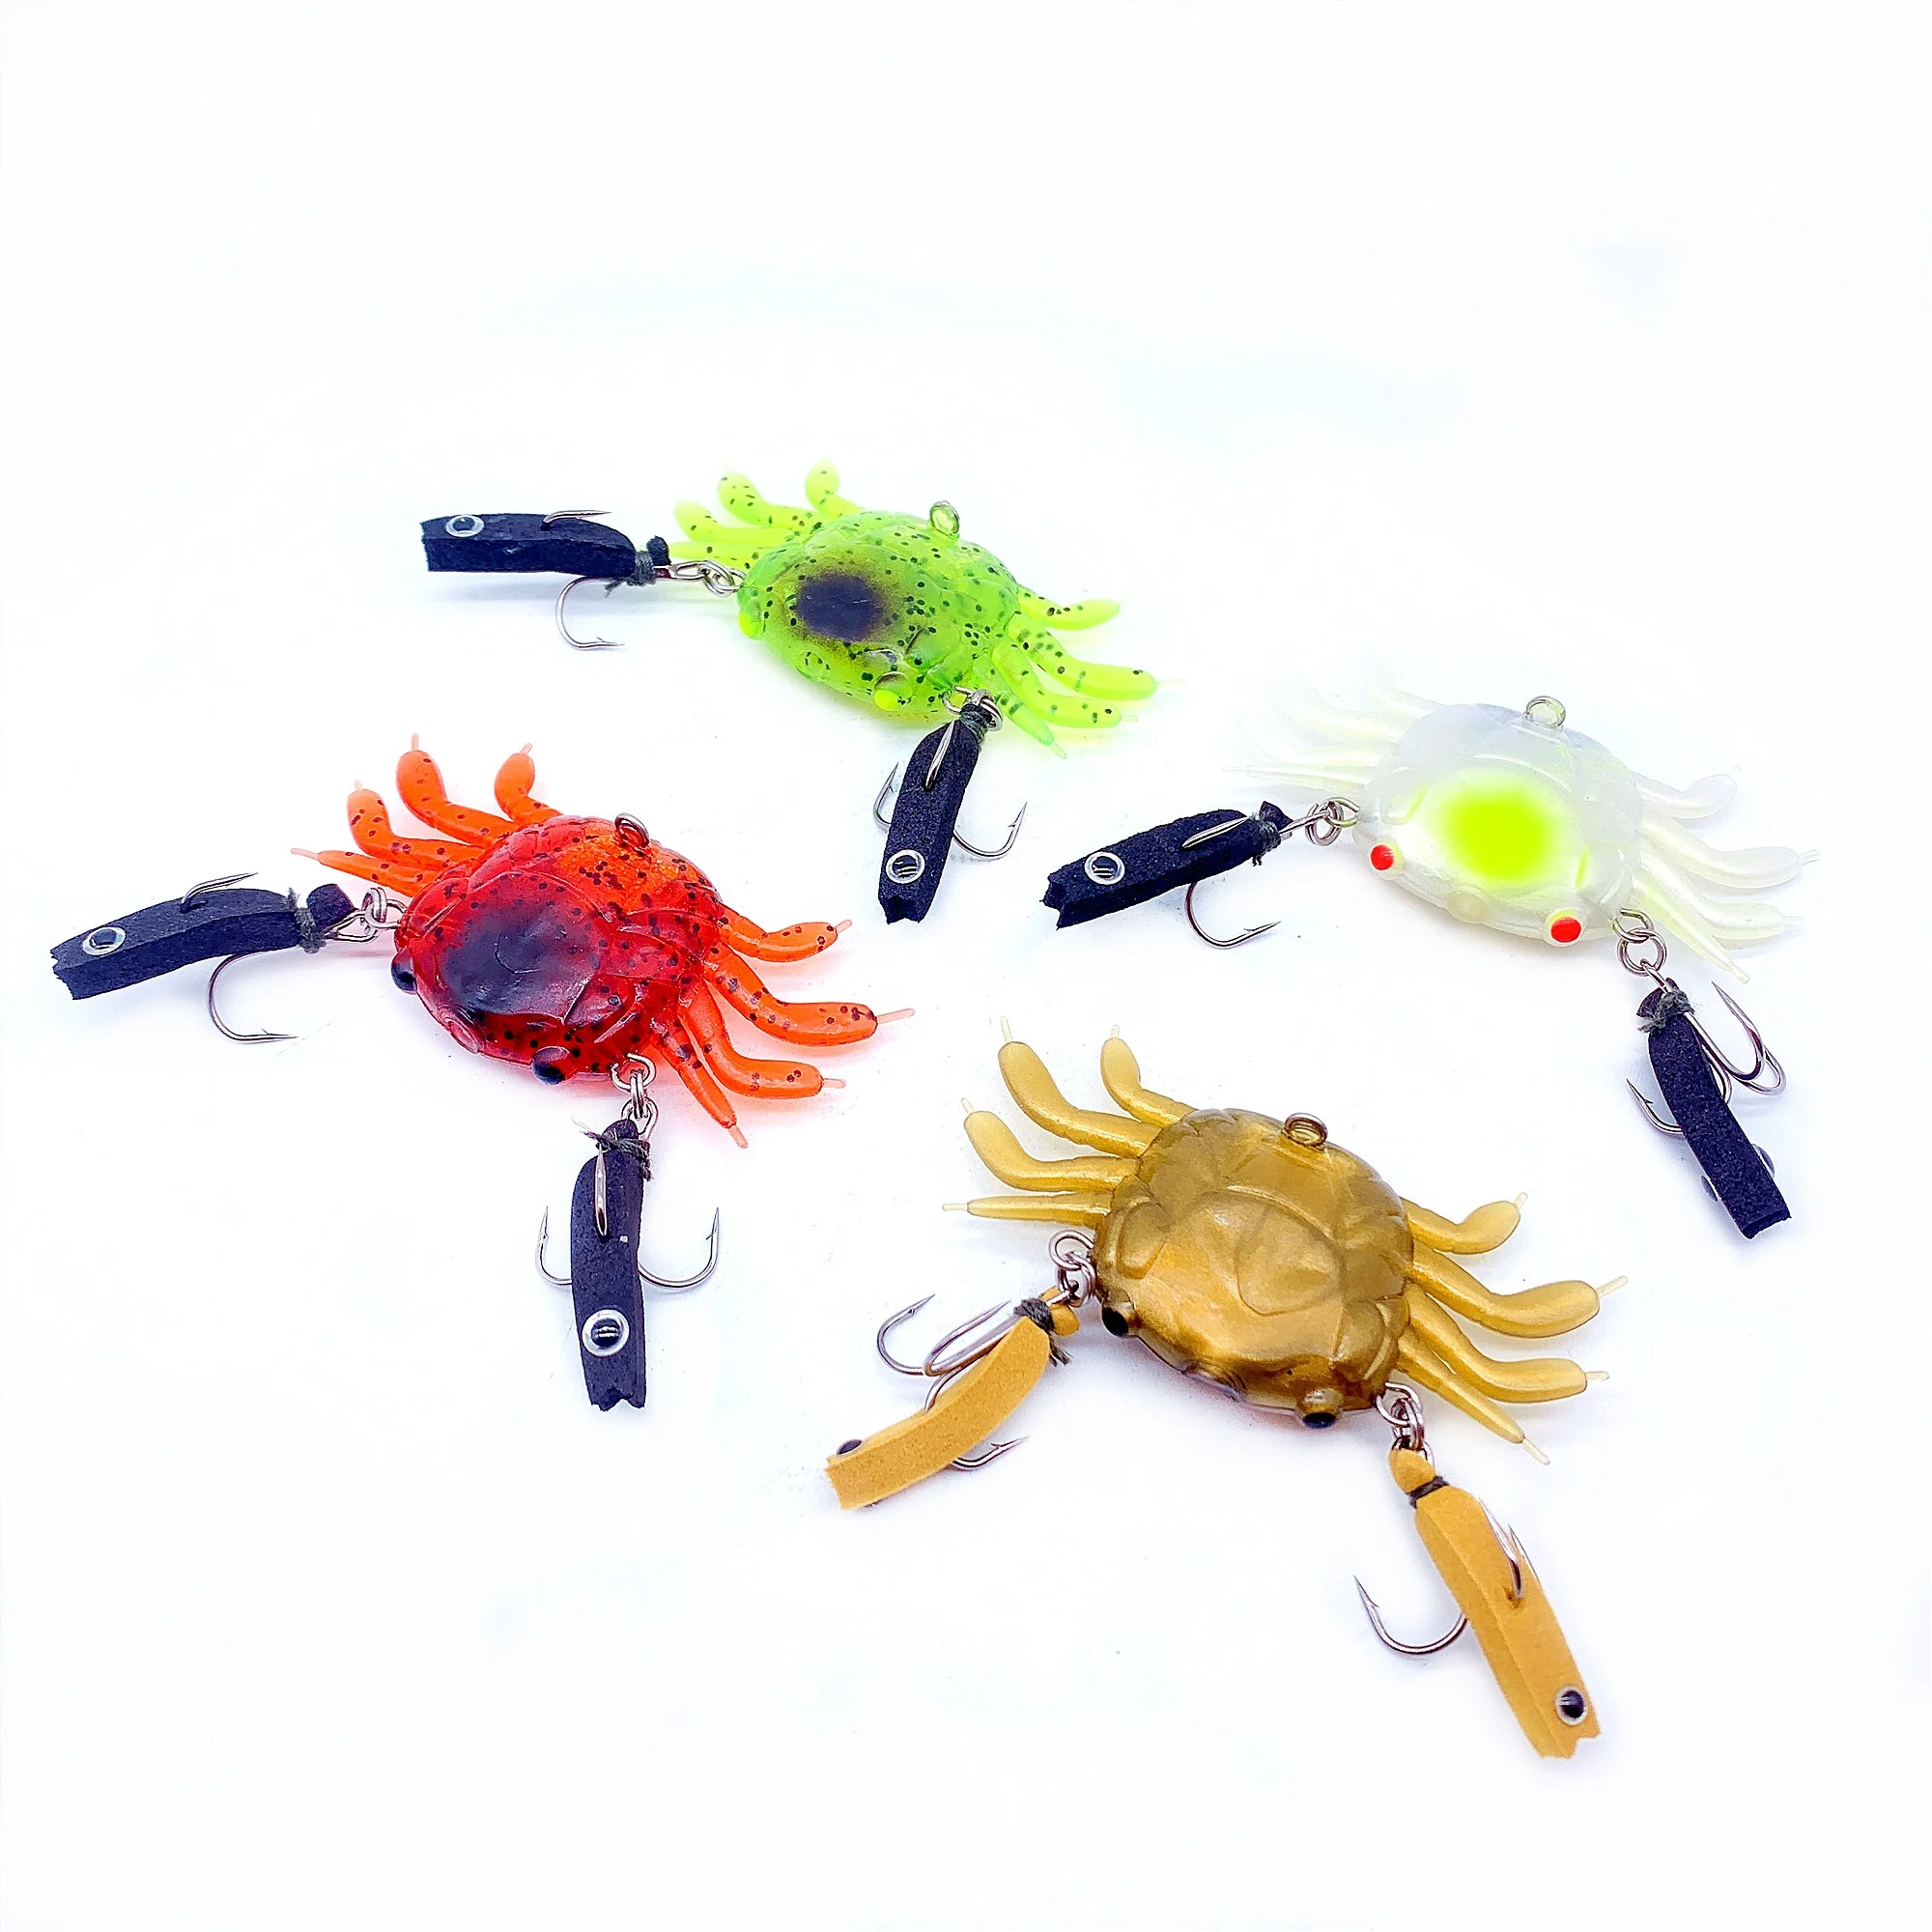 

45mm 65mm TPE material crab fishing lure 3D eyes crabs soft plastic fishing lure